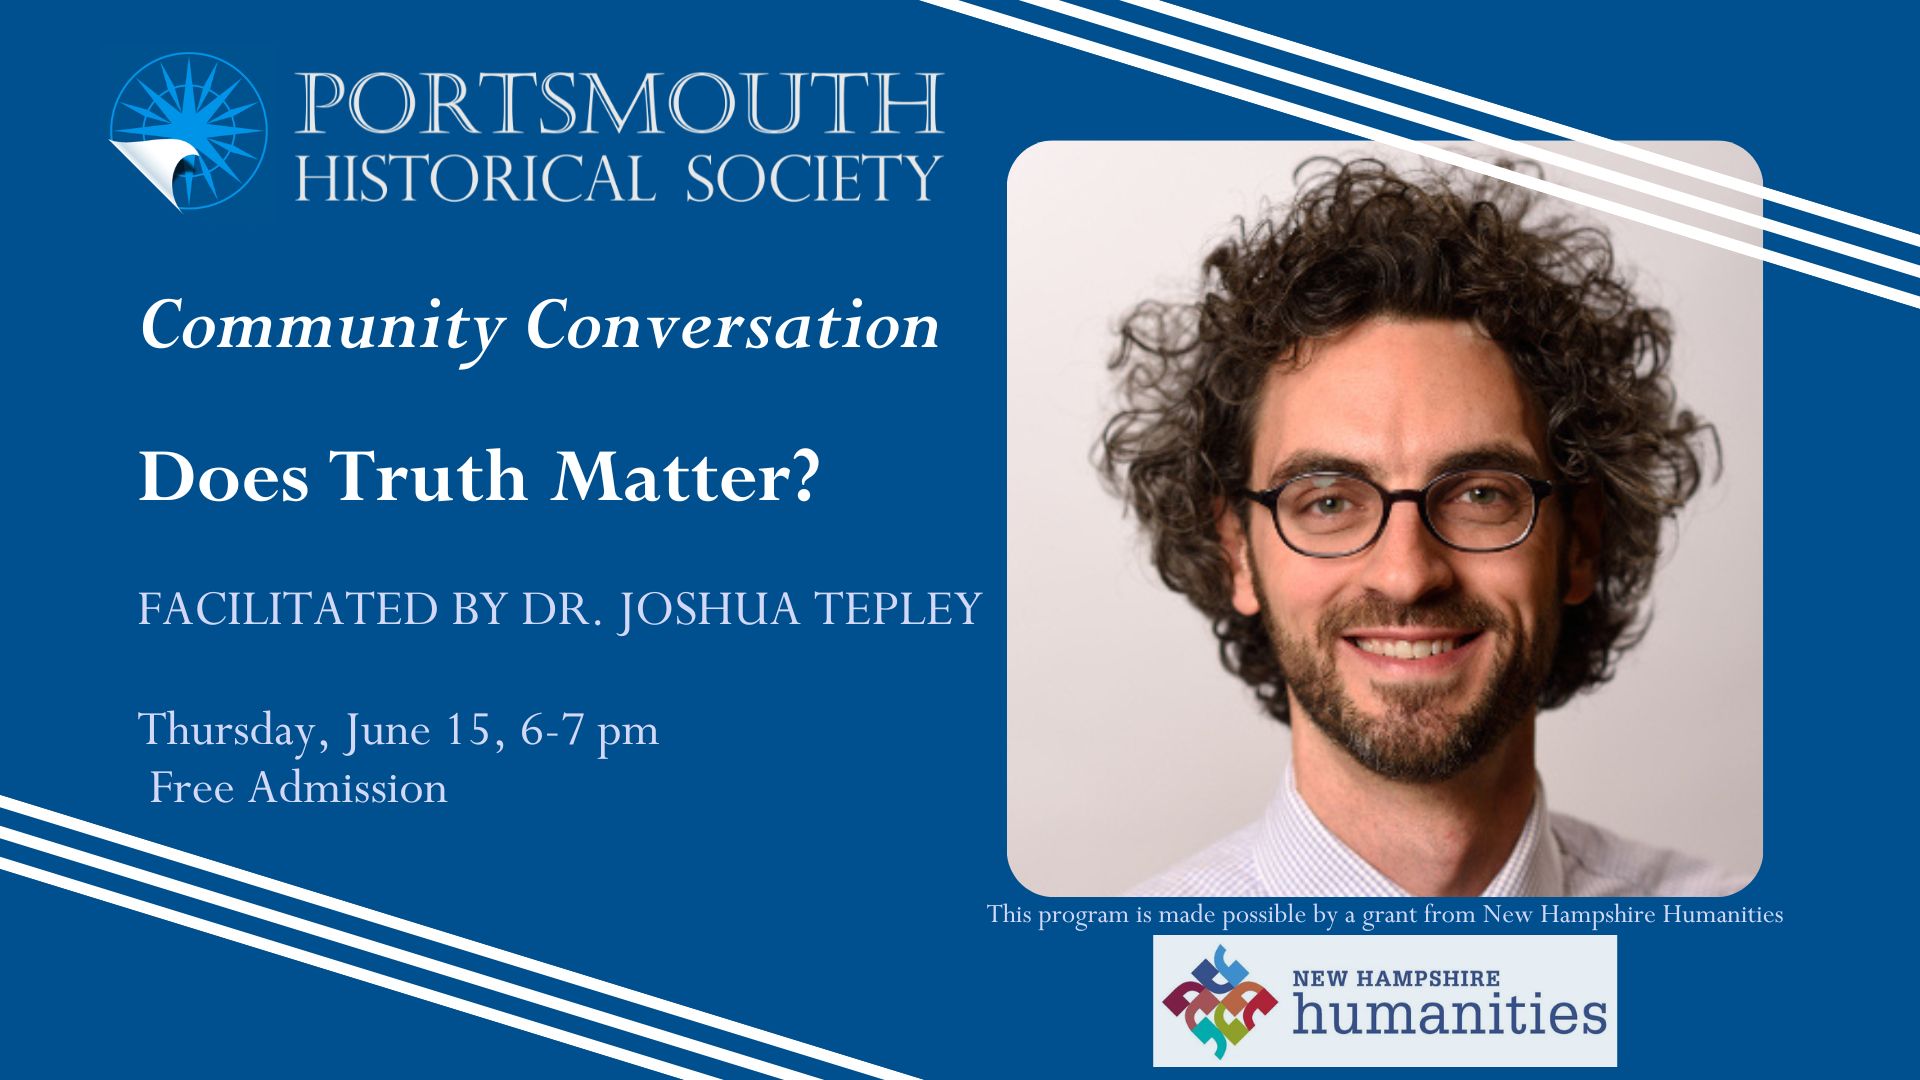 Community Conversation 6/15 Does Truth Matter? Free to attend, preregistration is recommended. Information on a blue background with an image of the presenter Dr. Joshua Tepley at right.